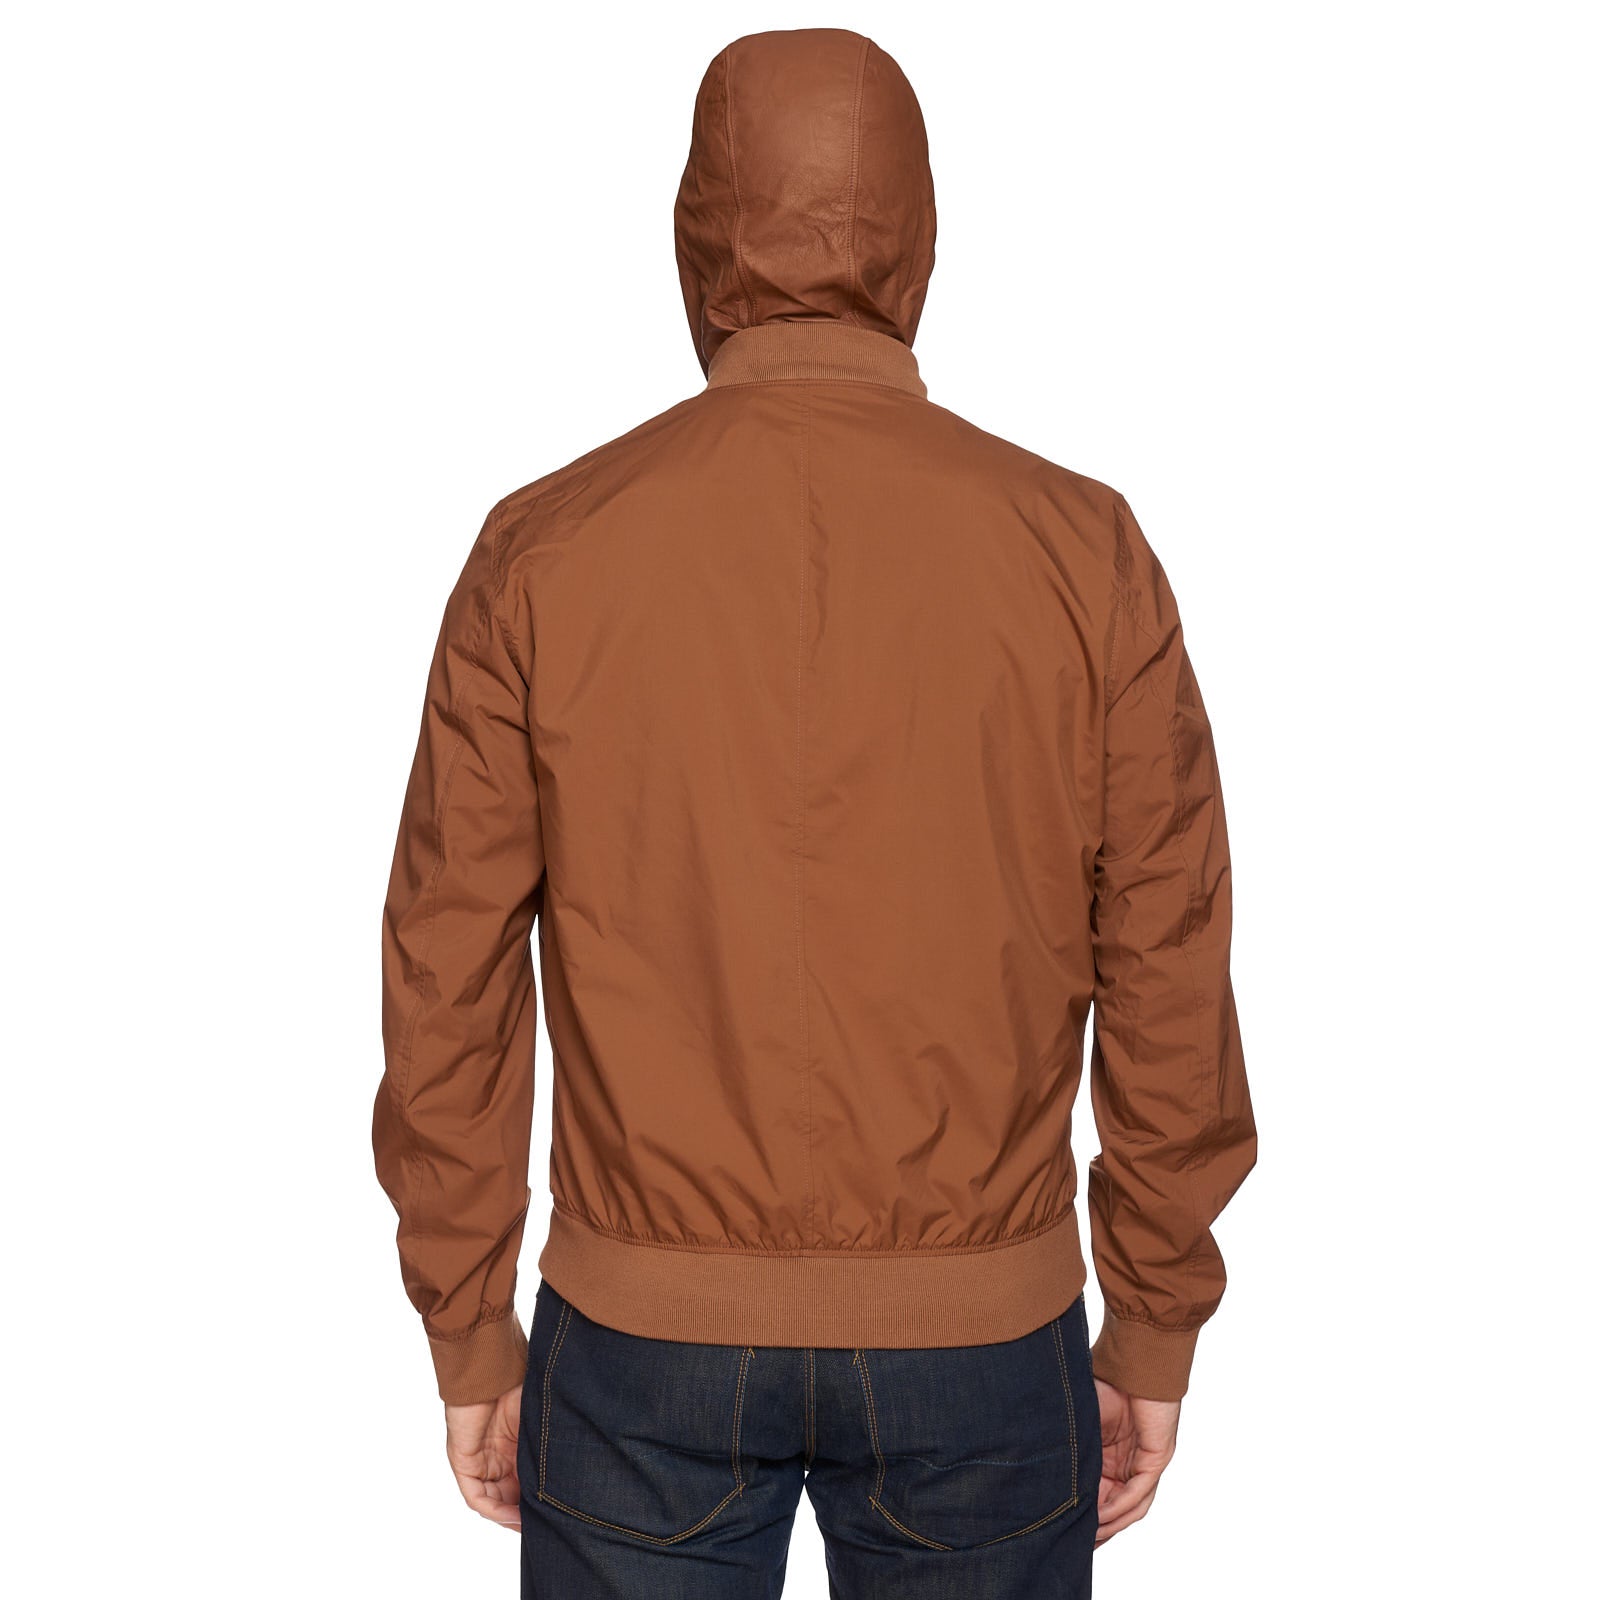 SERAPHIN Bomber Blouson Windbreaker Jacket with Removable Hood FR 50 NEW US M SERAPHIN